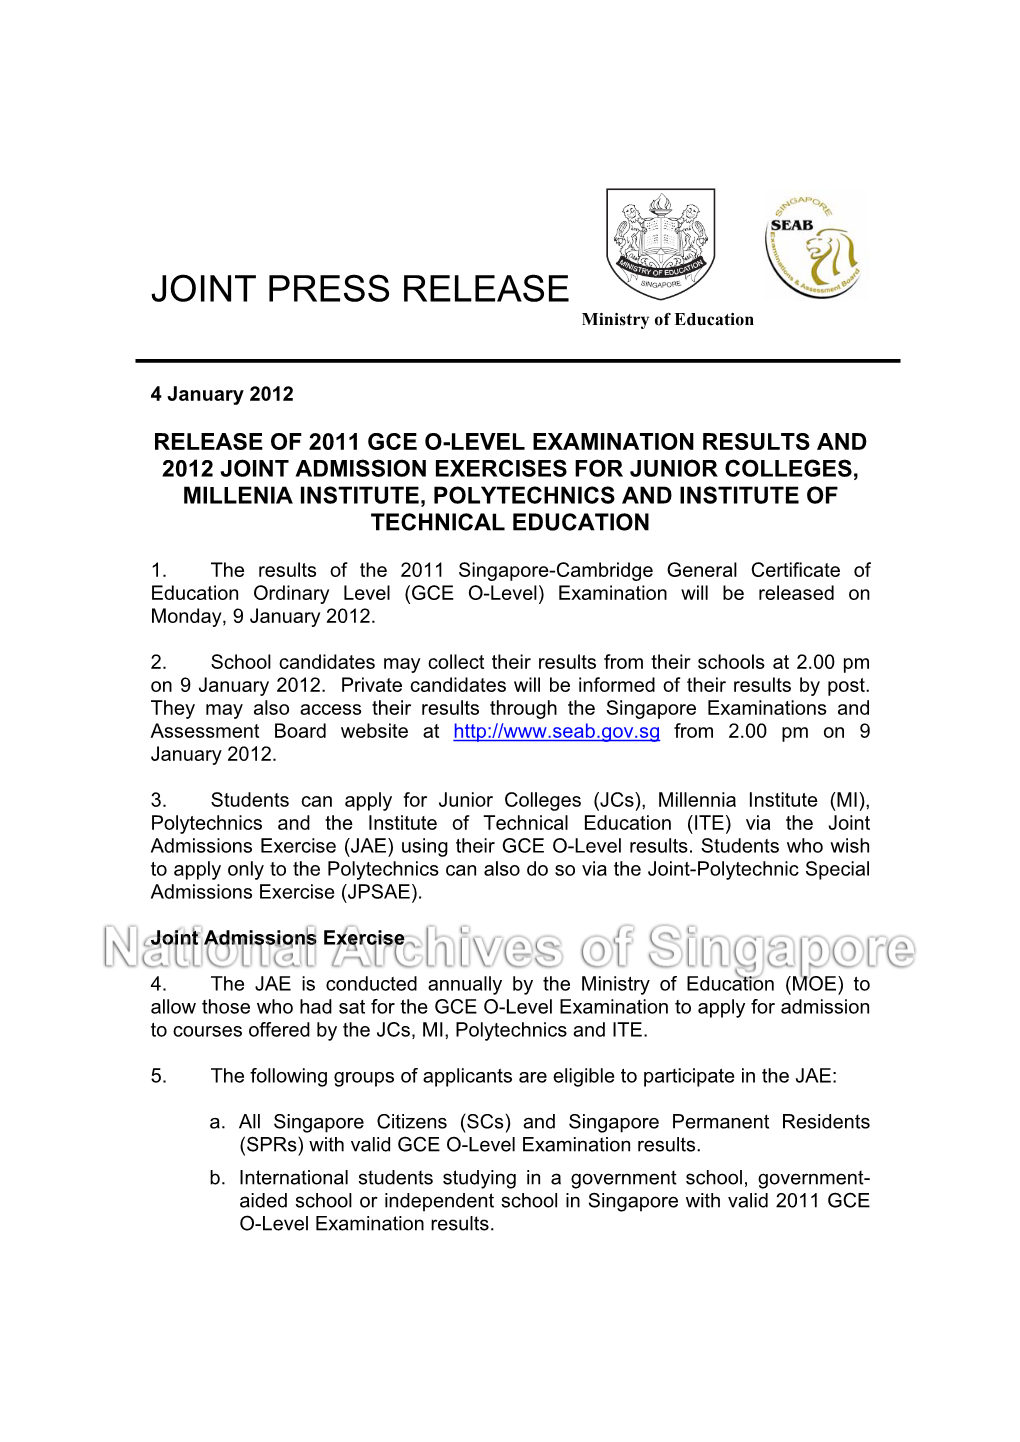 JOINT PRESS RELEASE Ministry of Education